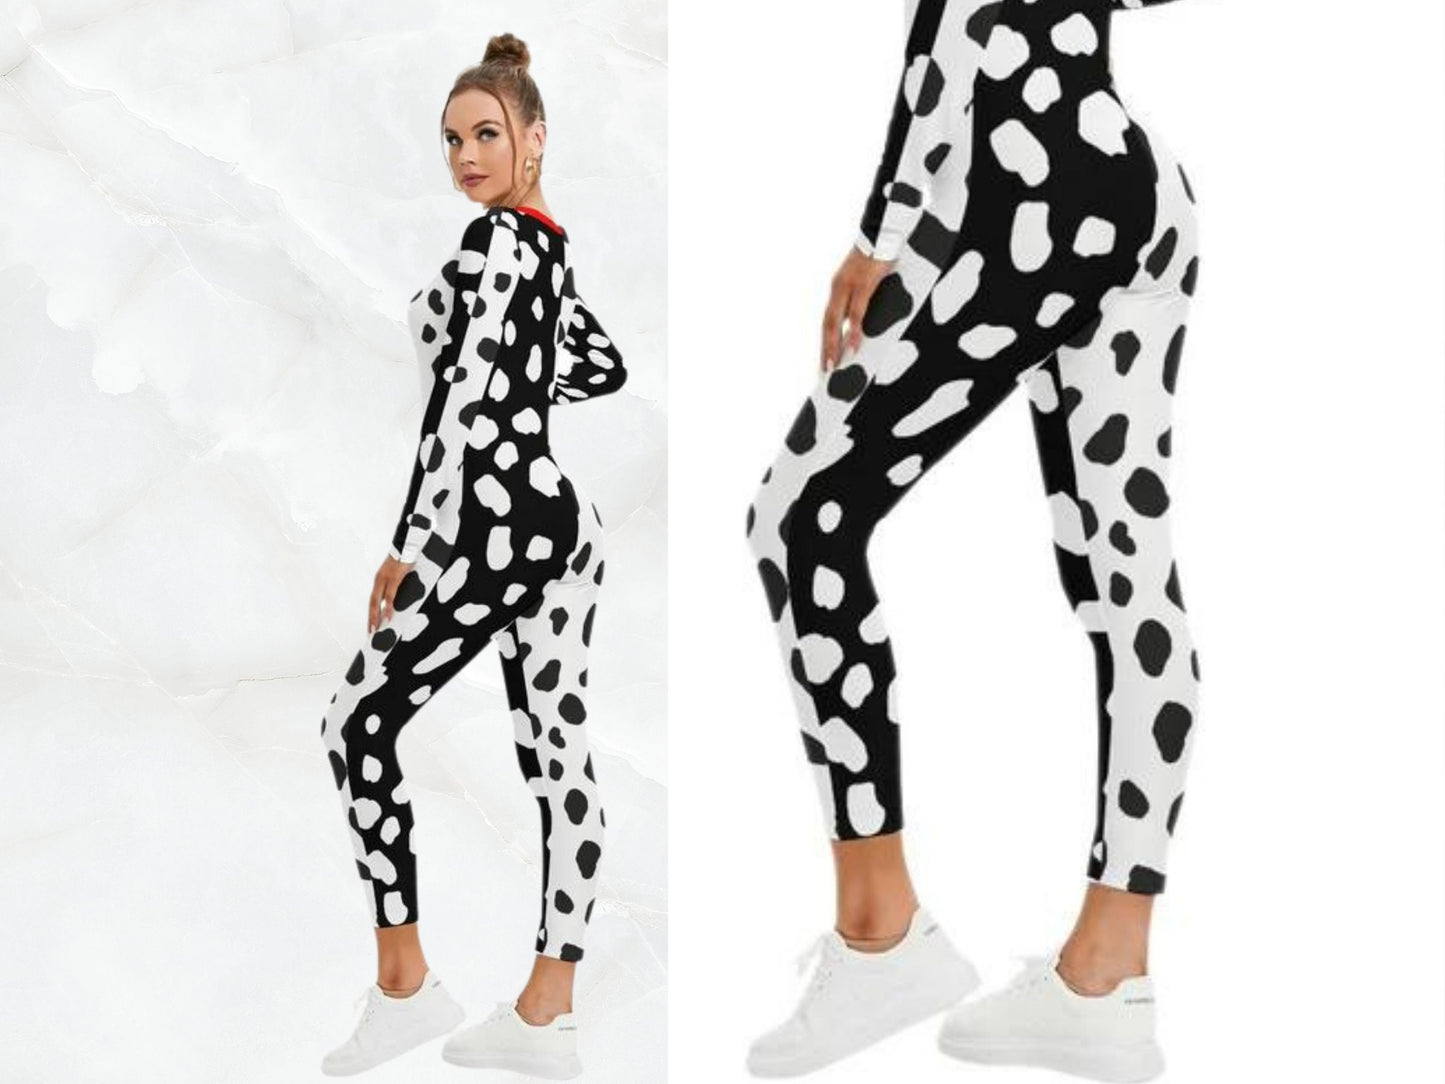 Cruel lady Dalmatians Inspired Women's Plunging Neck Jumpsuit, Disny Cosplay, Adult Halloween Costume, Gift for Her, Sexy Bodysuit